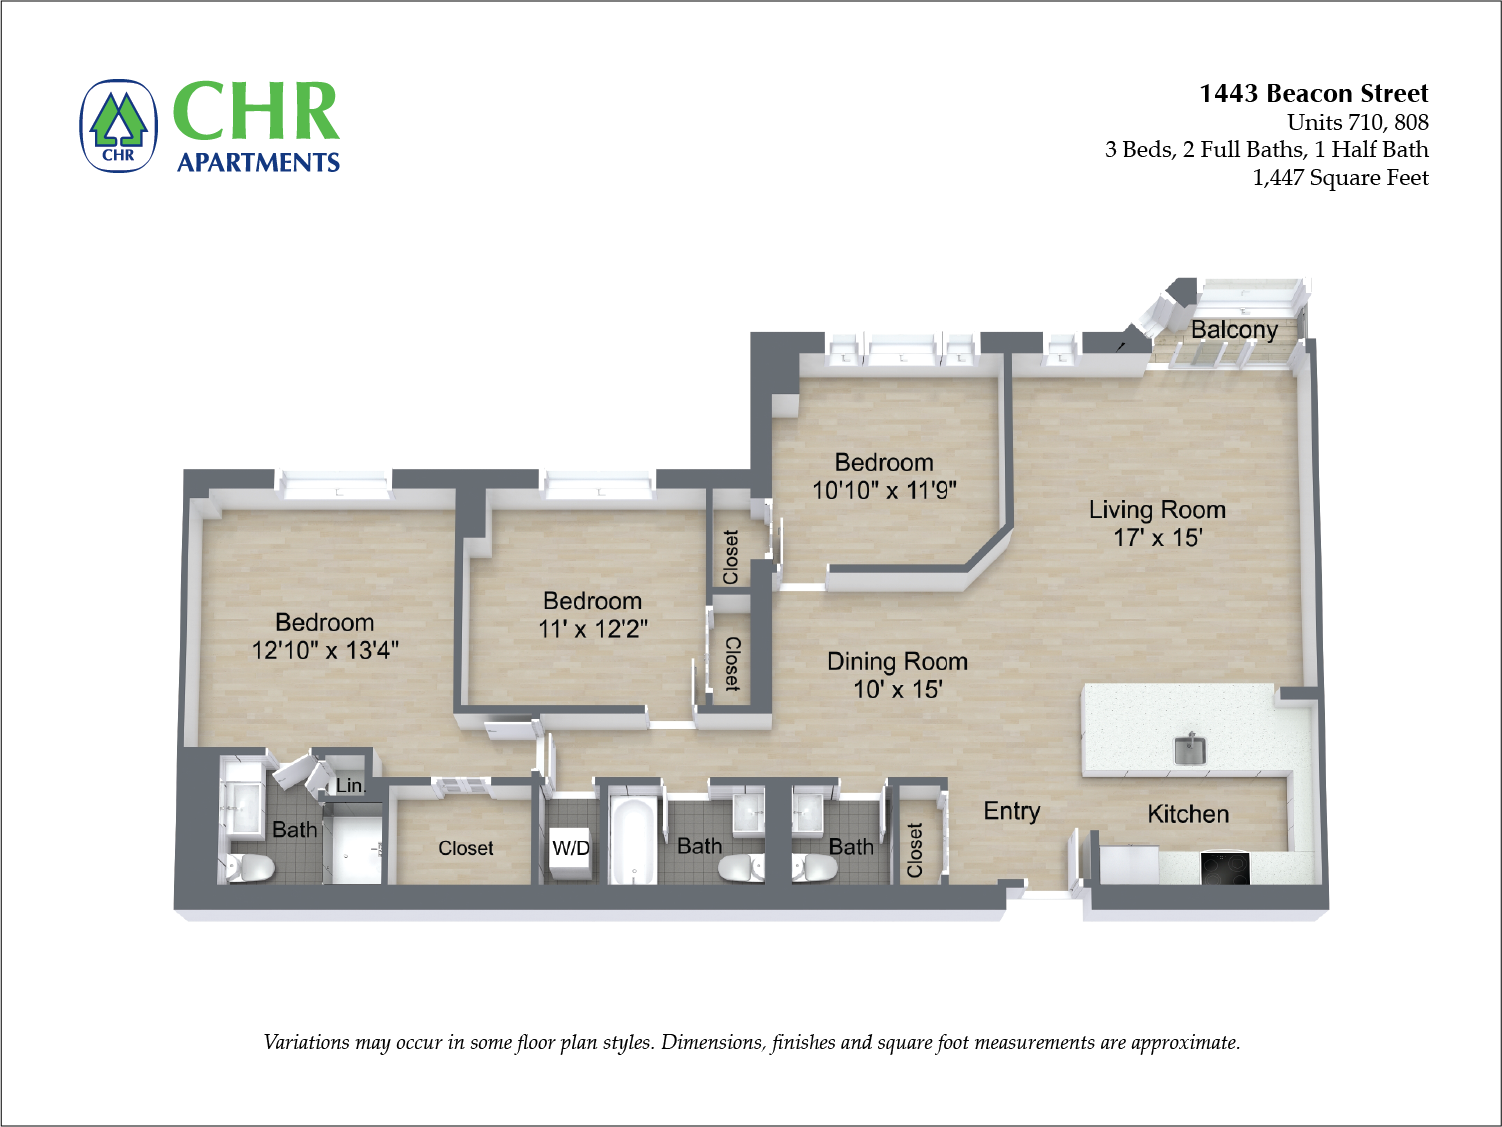 Click to view 3 Bed/3 Bath floor plan gallery